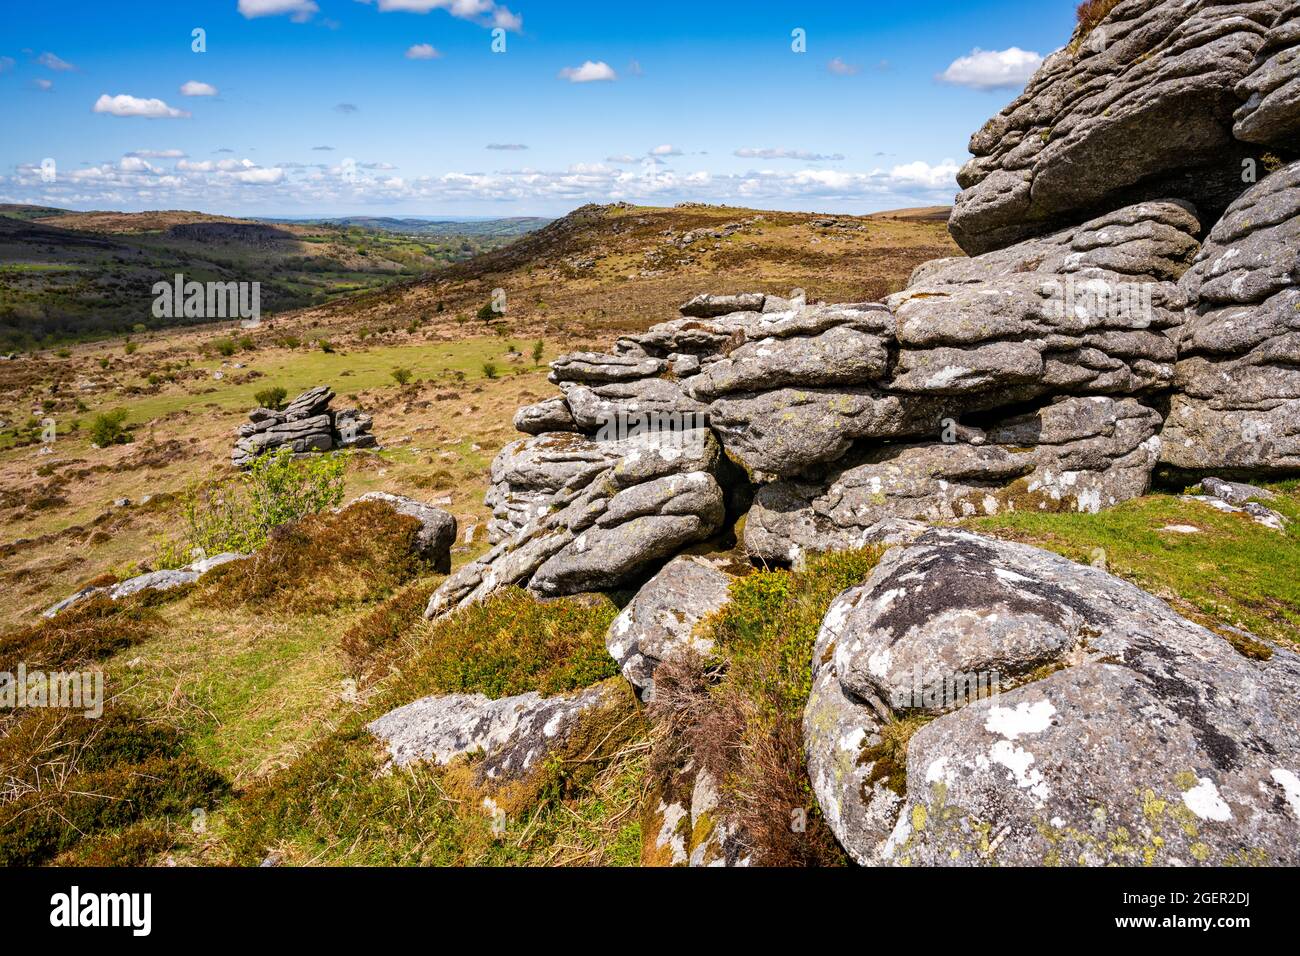 View of Holwell Tor, seen from Emsworthy Rocks, Dartmoor National Park, Devon, UK. Stock Photo